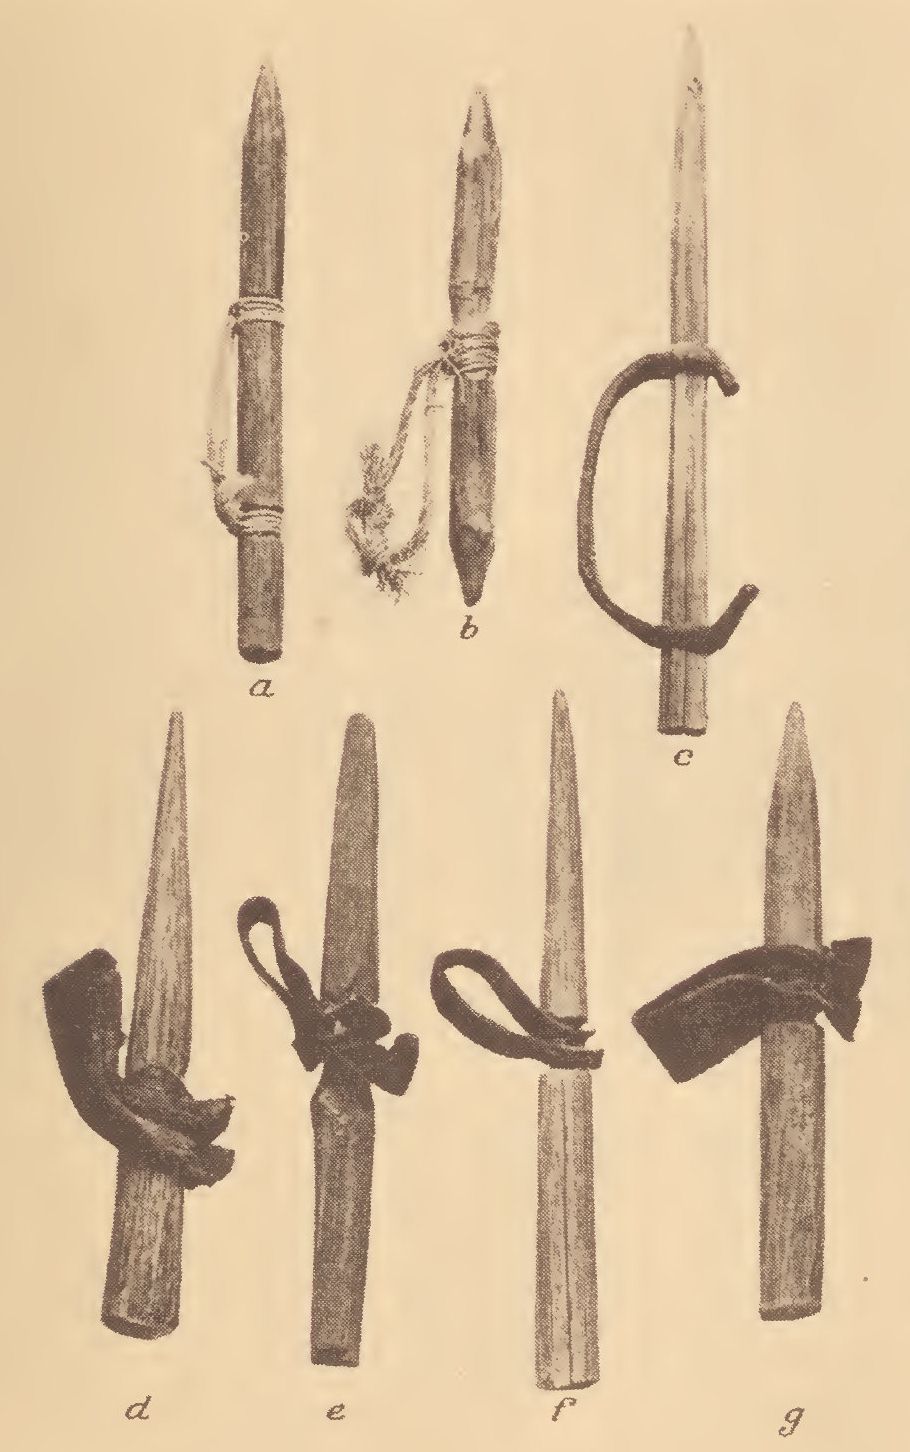 powhatan tools and weapons